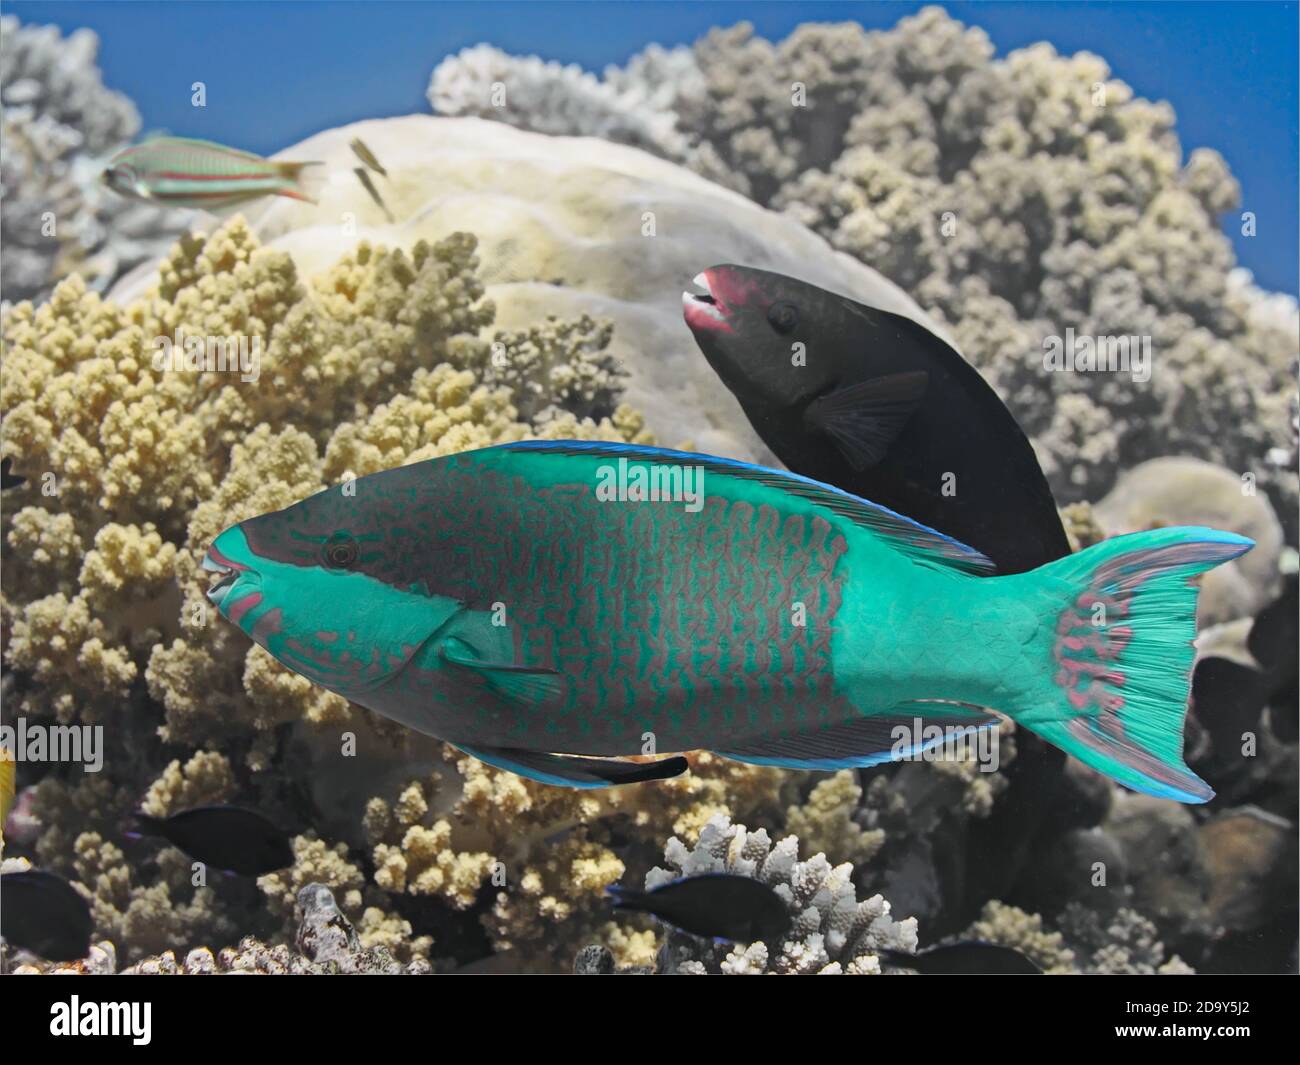 Bridled parrotfish fish in water near coral reef in tropical sea Stock Photo